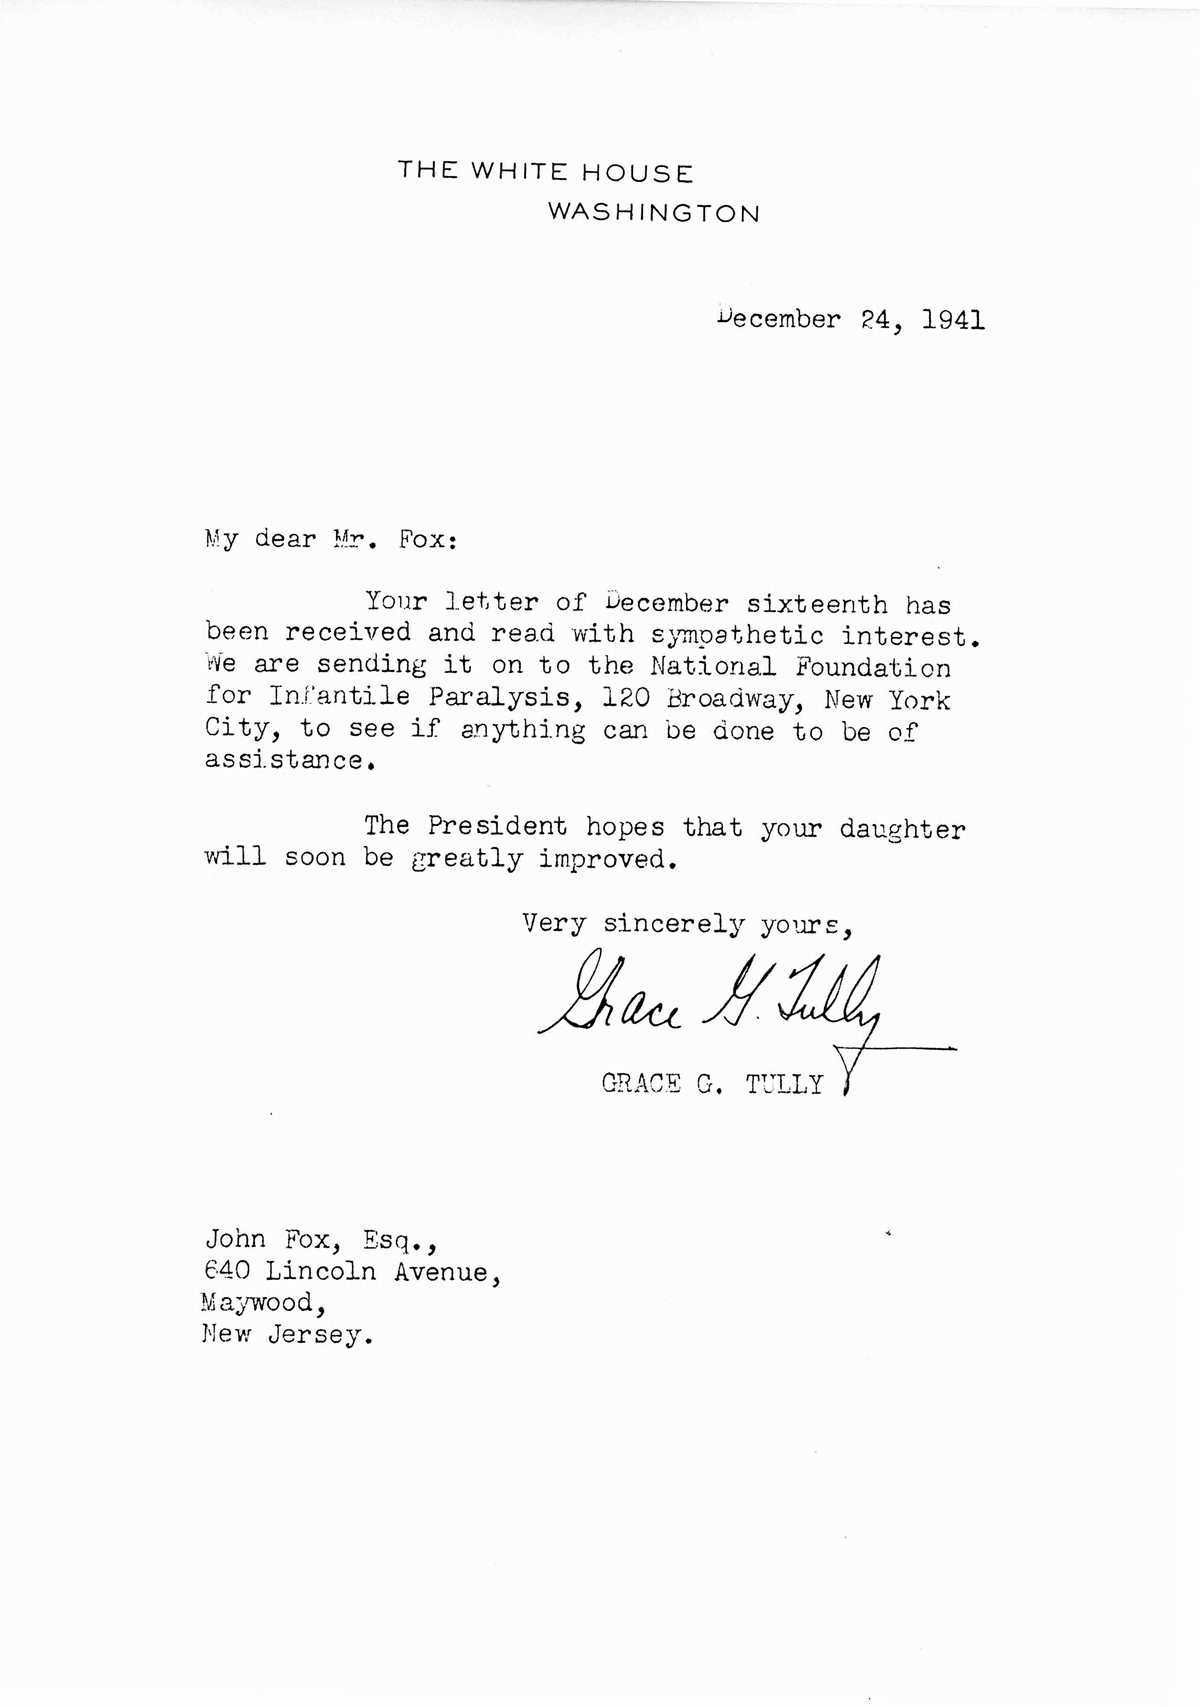 Correspondence from the White House  Post Polio: Polio Place